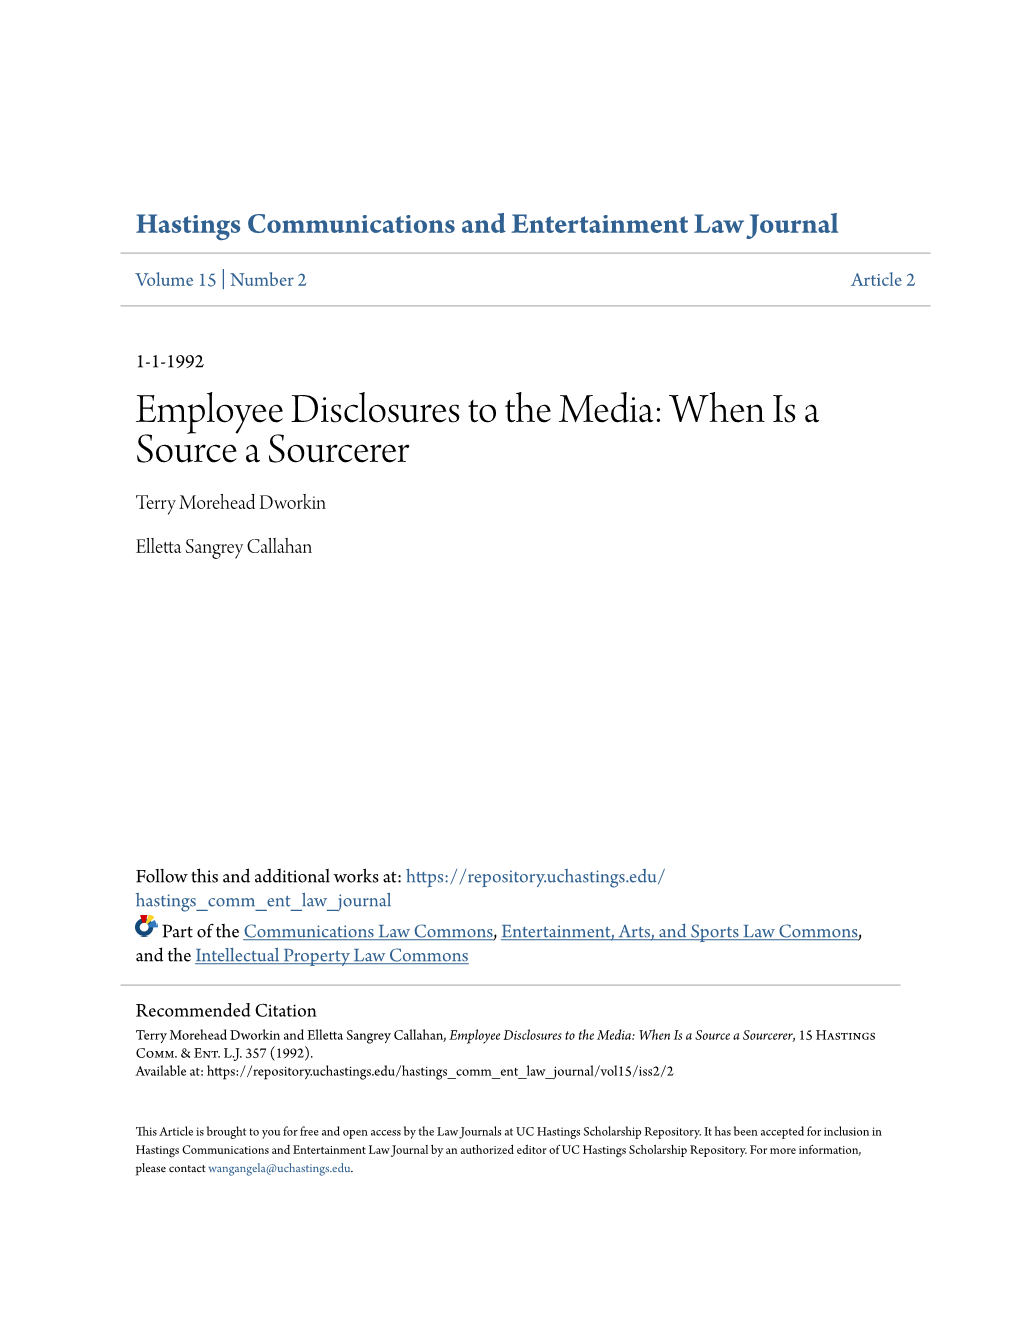 Employee Disclosures to the Media: When Is a Source a Sourcerer Terry Morehead Dworkin